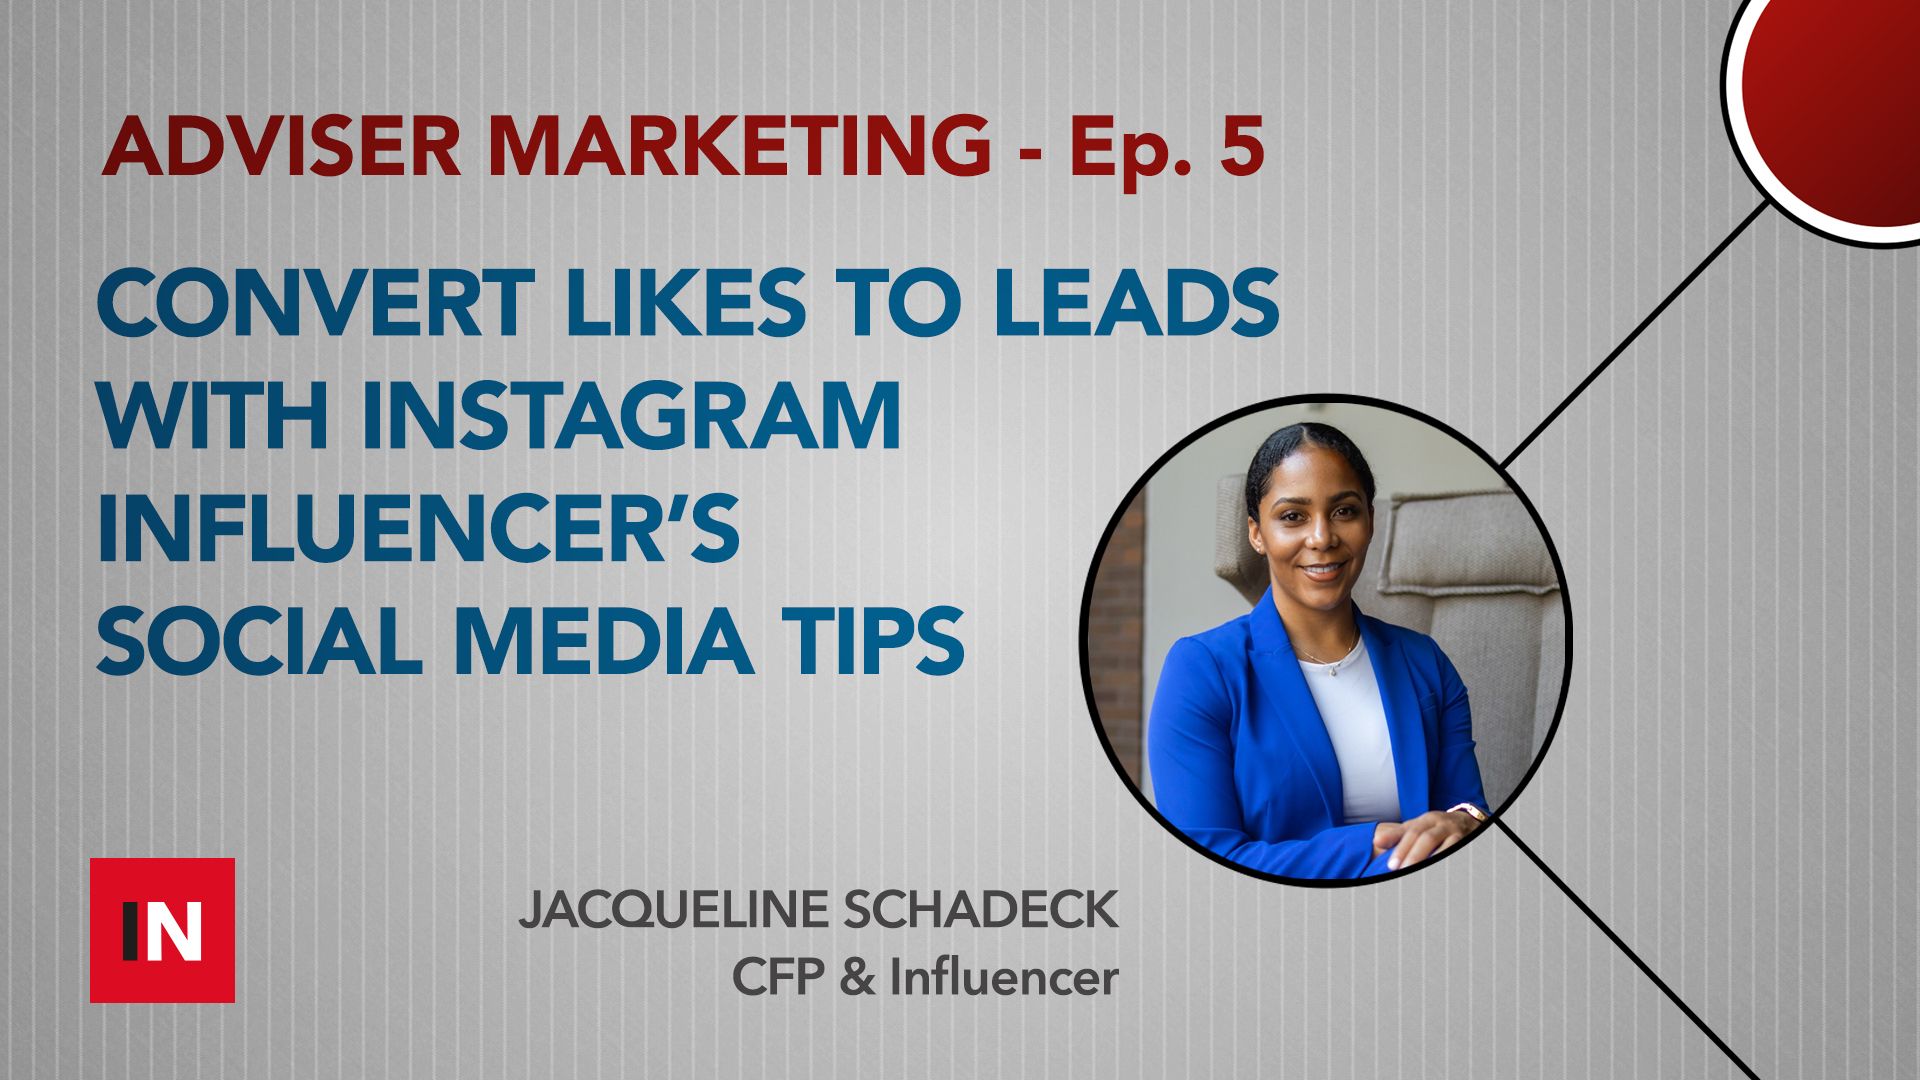 Convert likes to lead with Instagram influencer’s social media tips